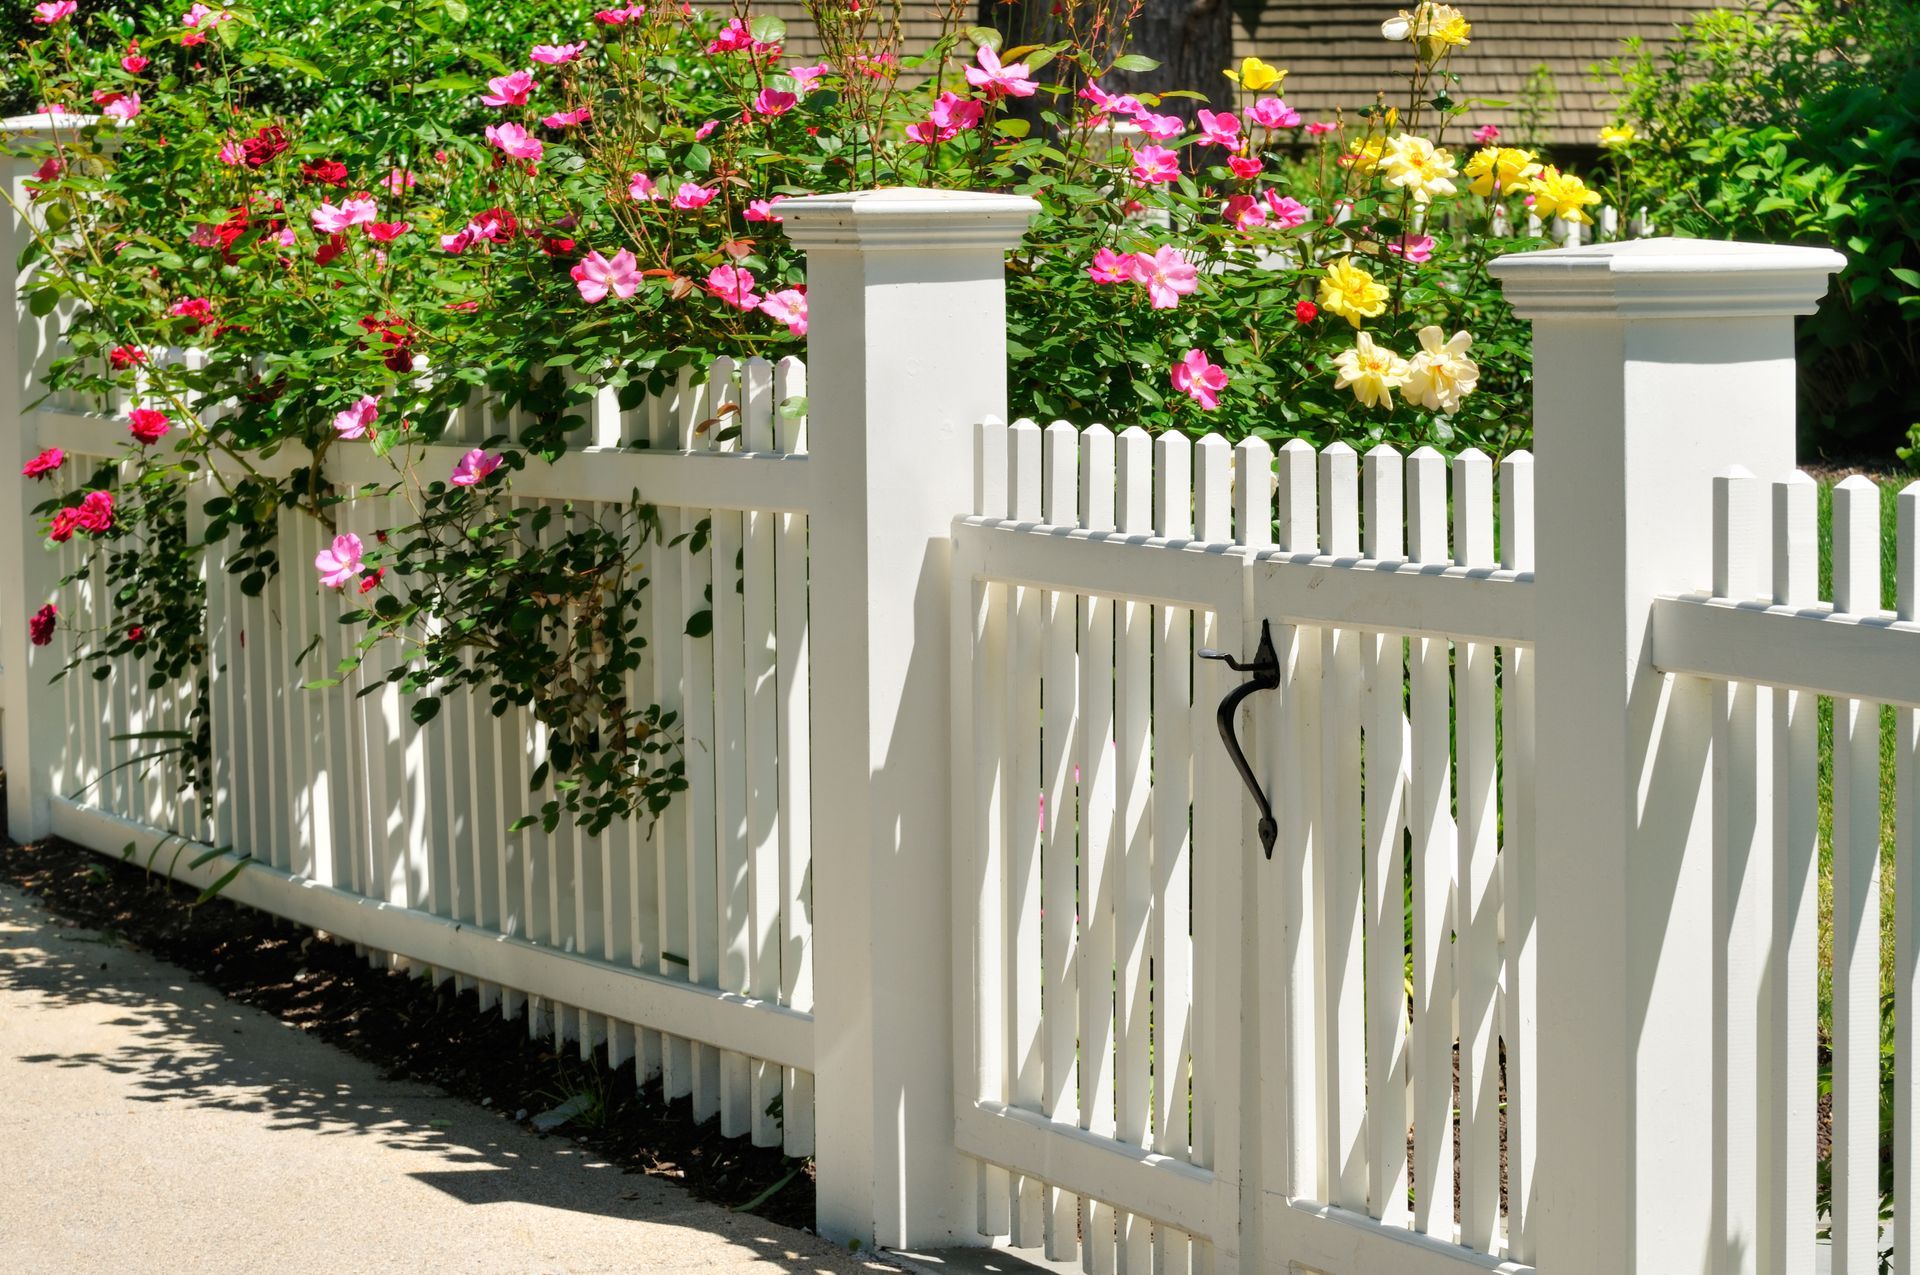 Charming white gate and fence adorned with beautiful climbing roses in full bloom, creating a picturesque garden entrance.